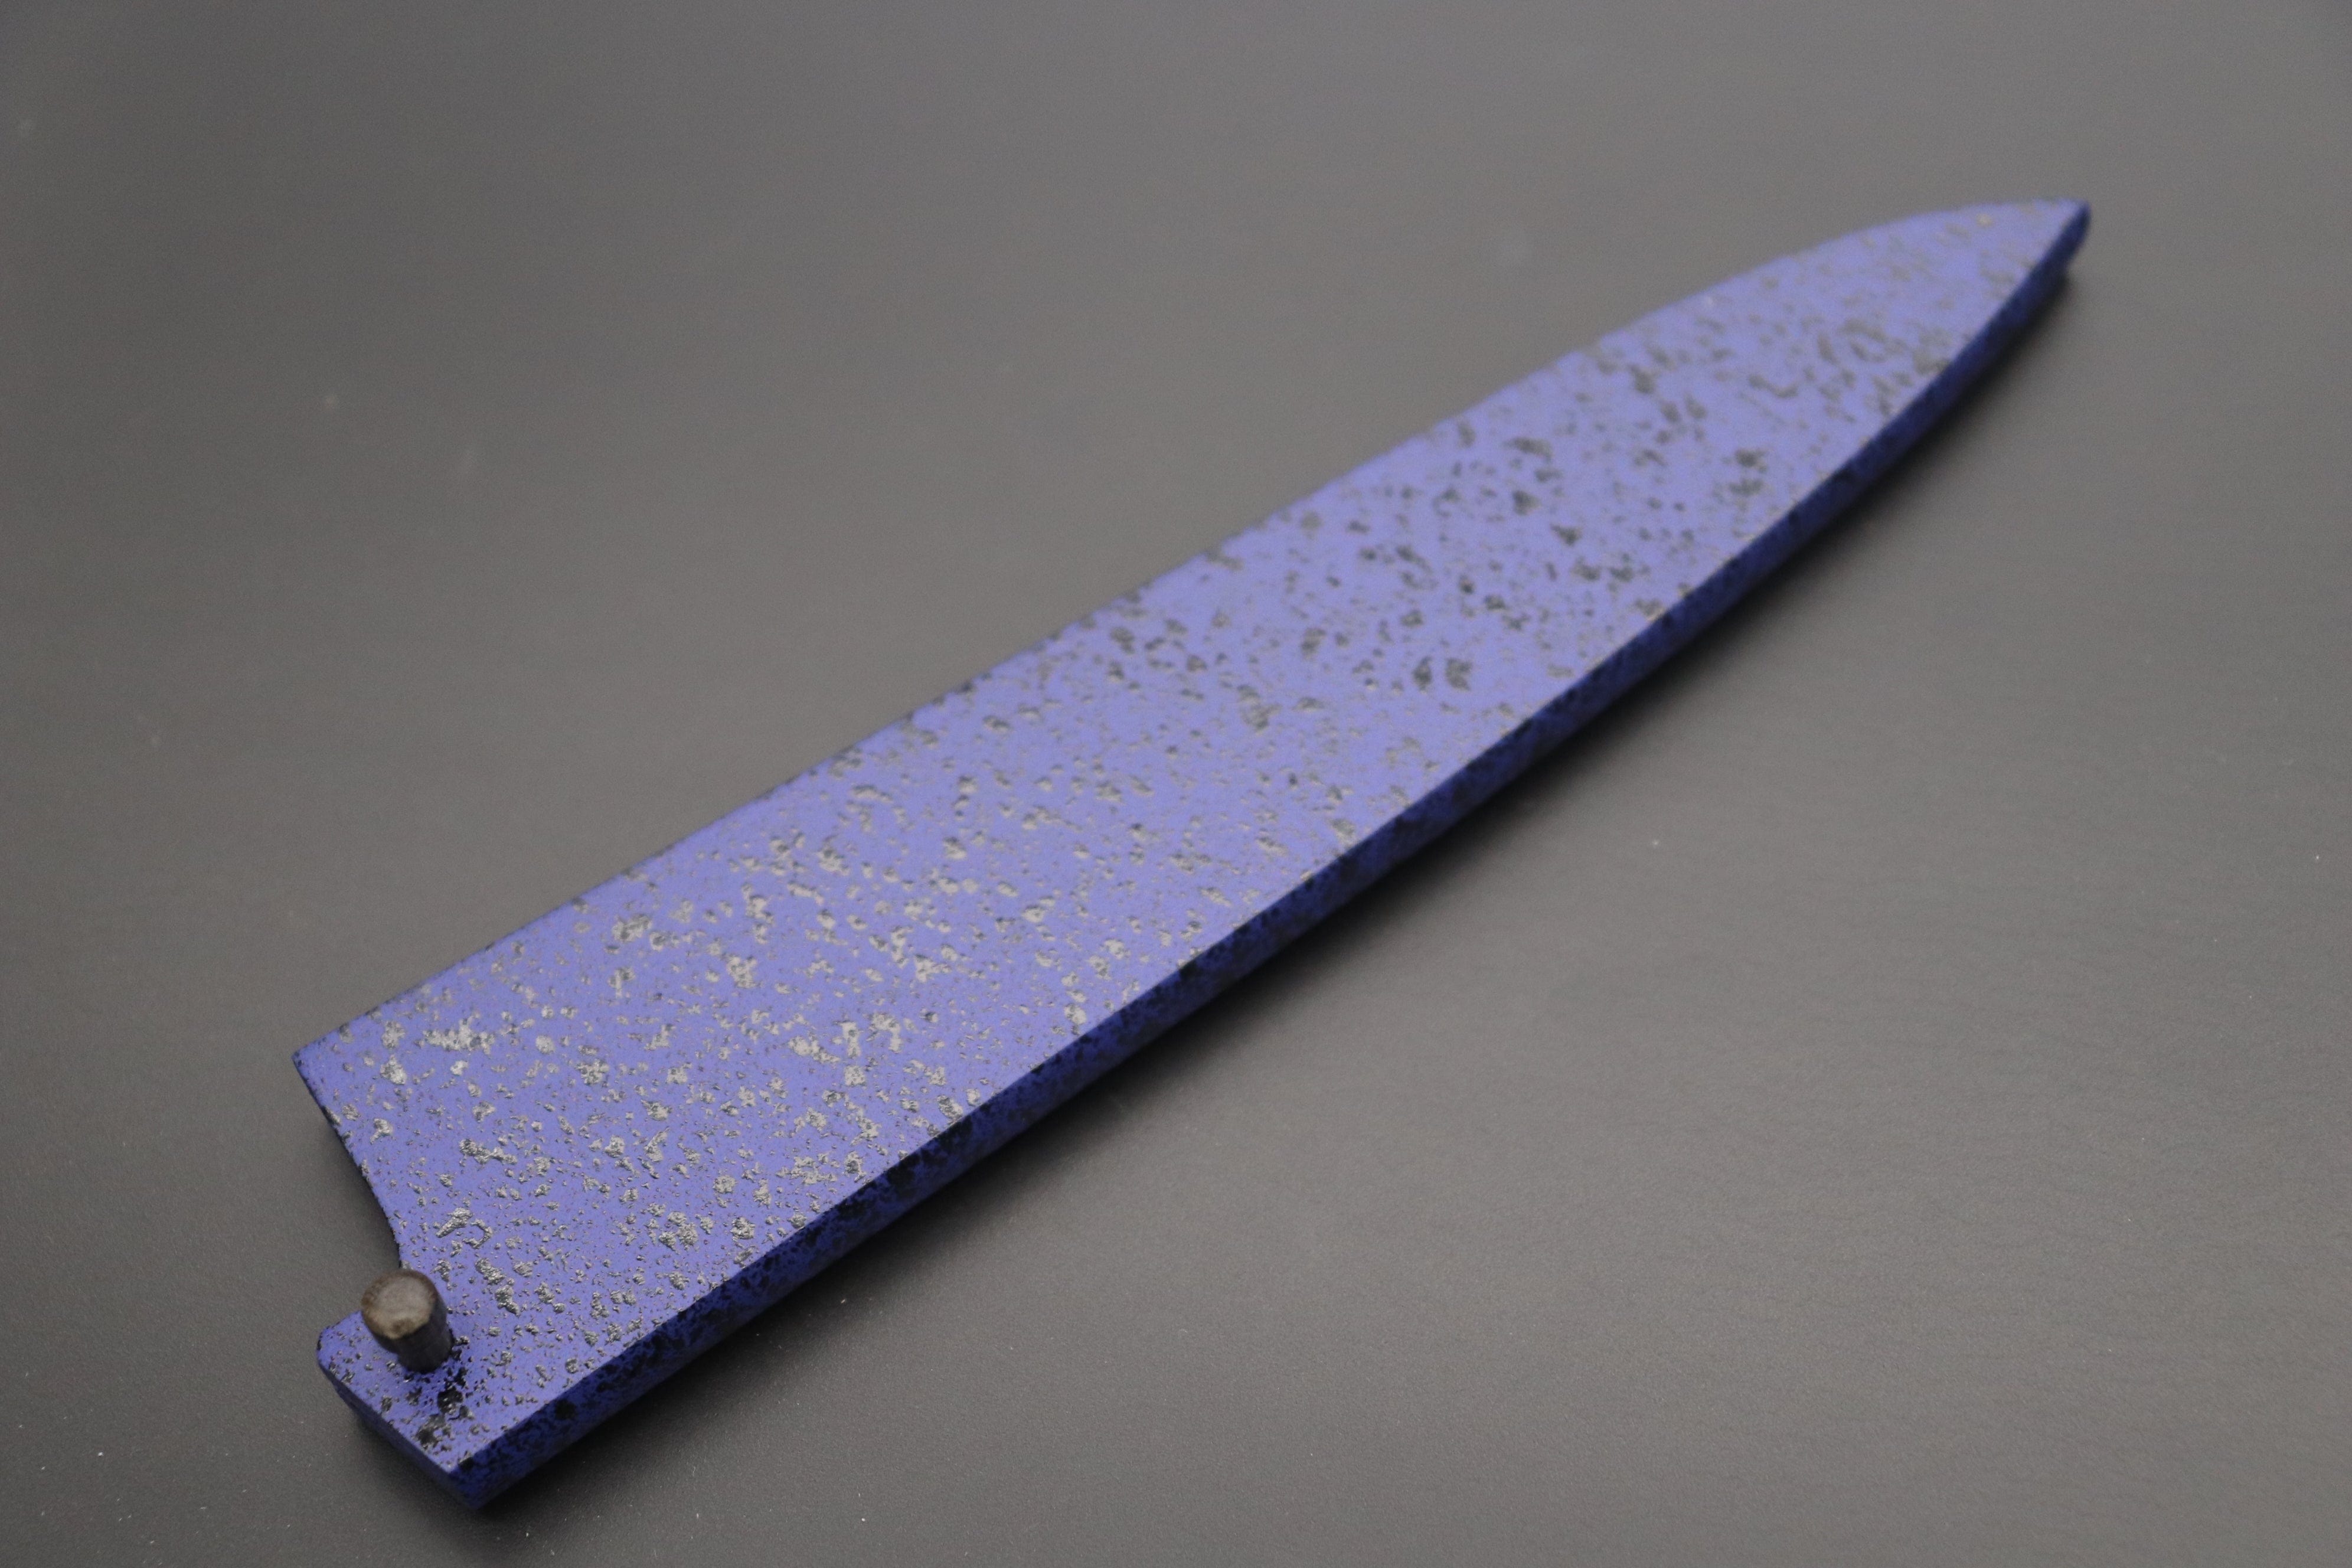 Blue Lacquered Wooden Saya (Sheath) For Petty